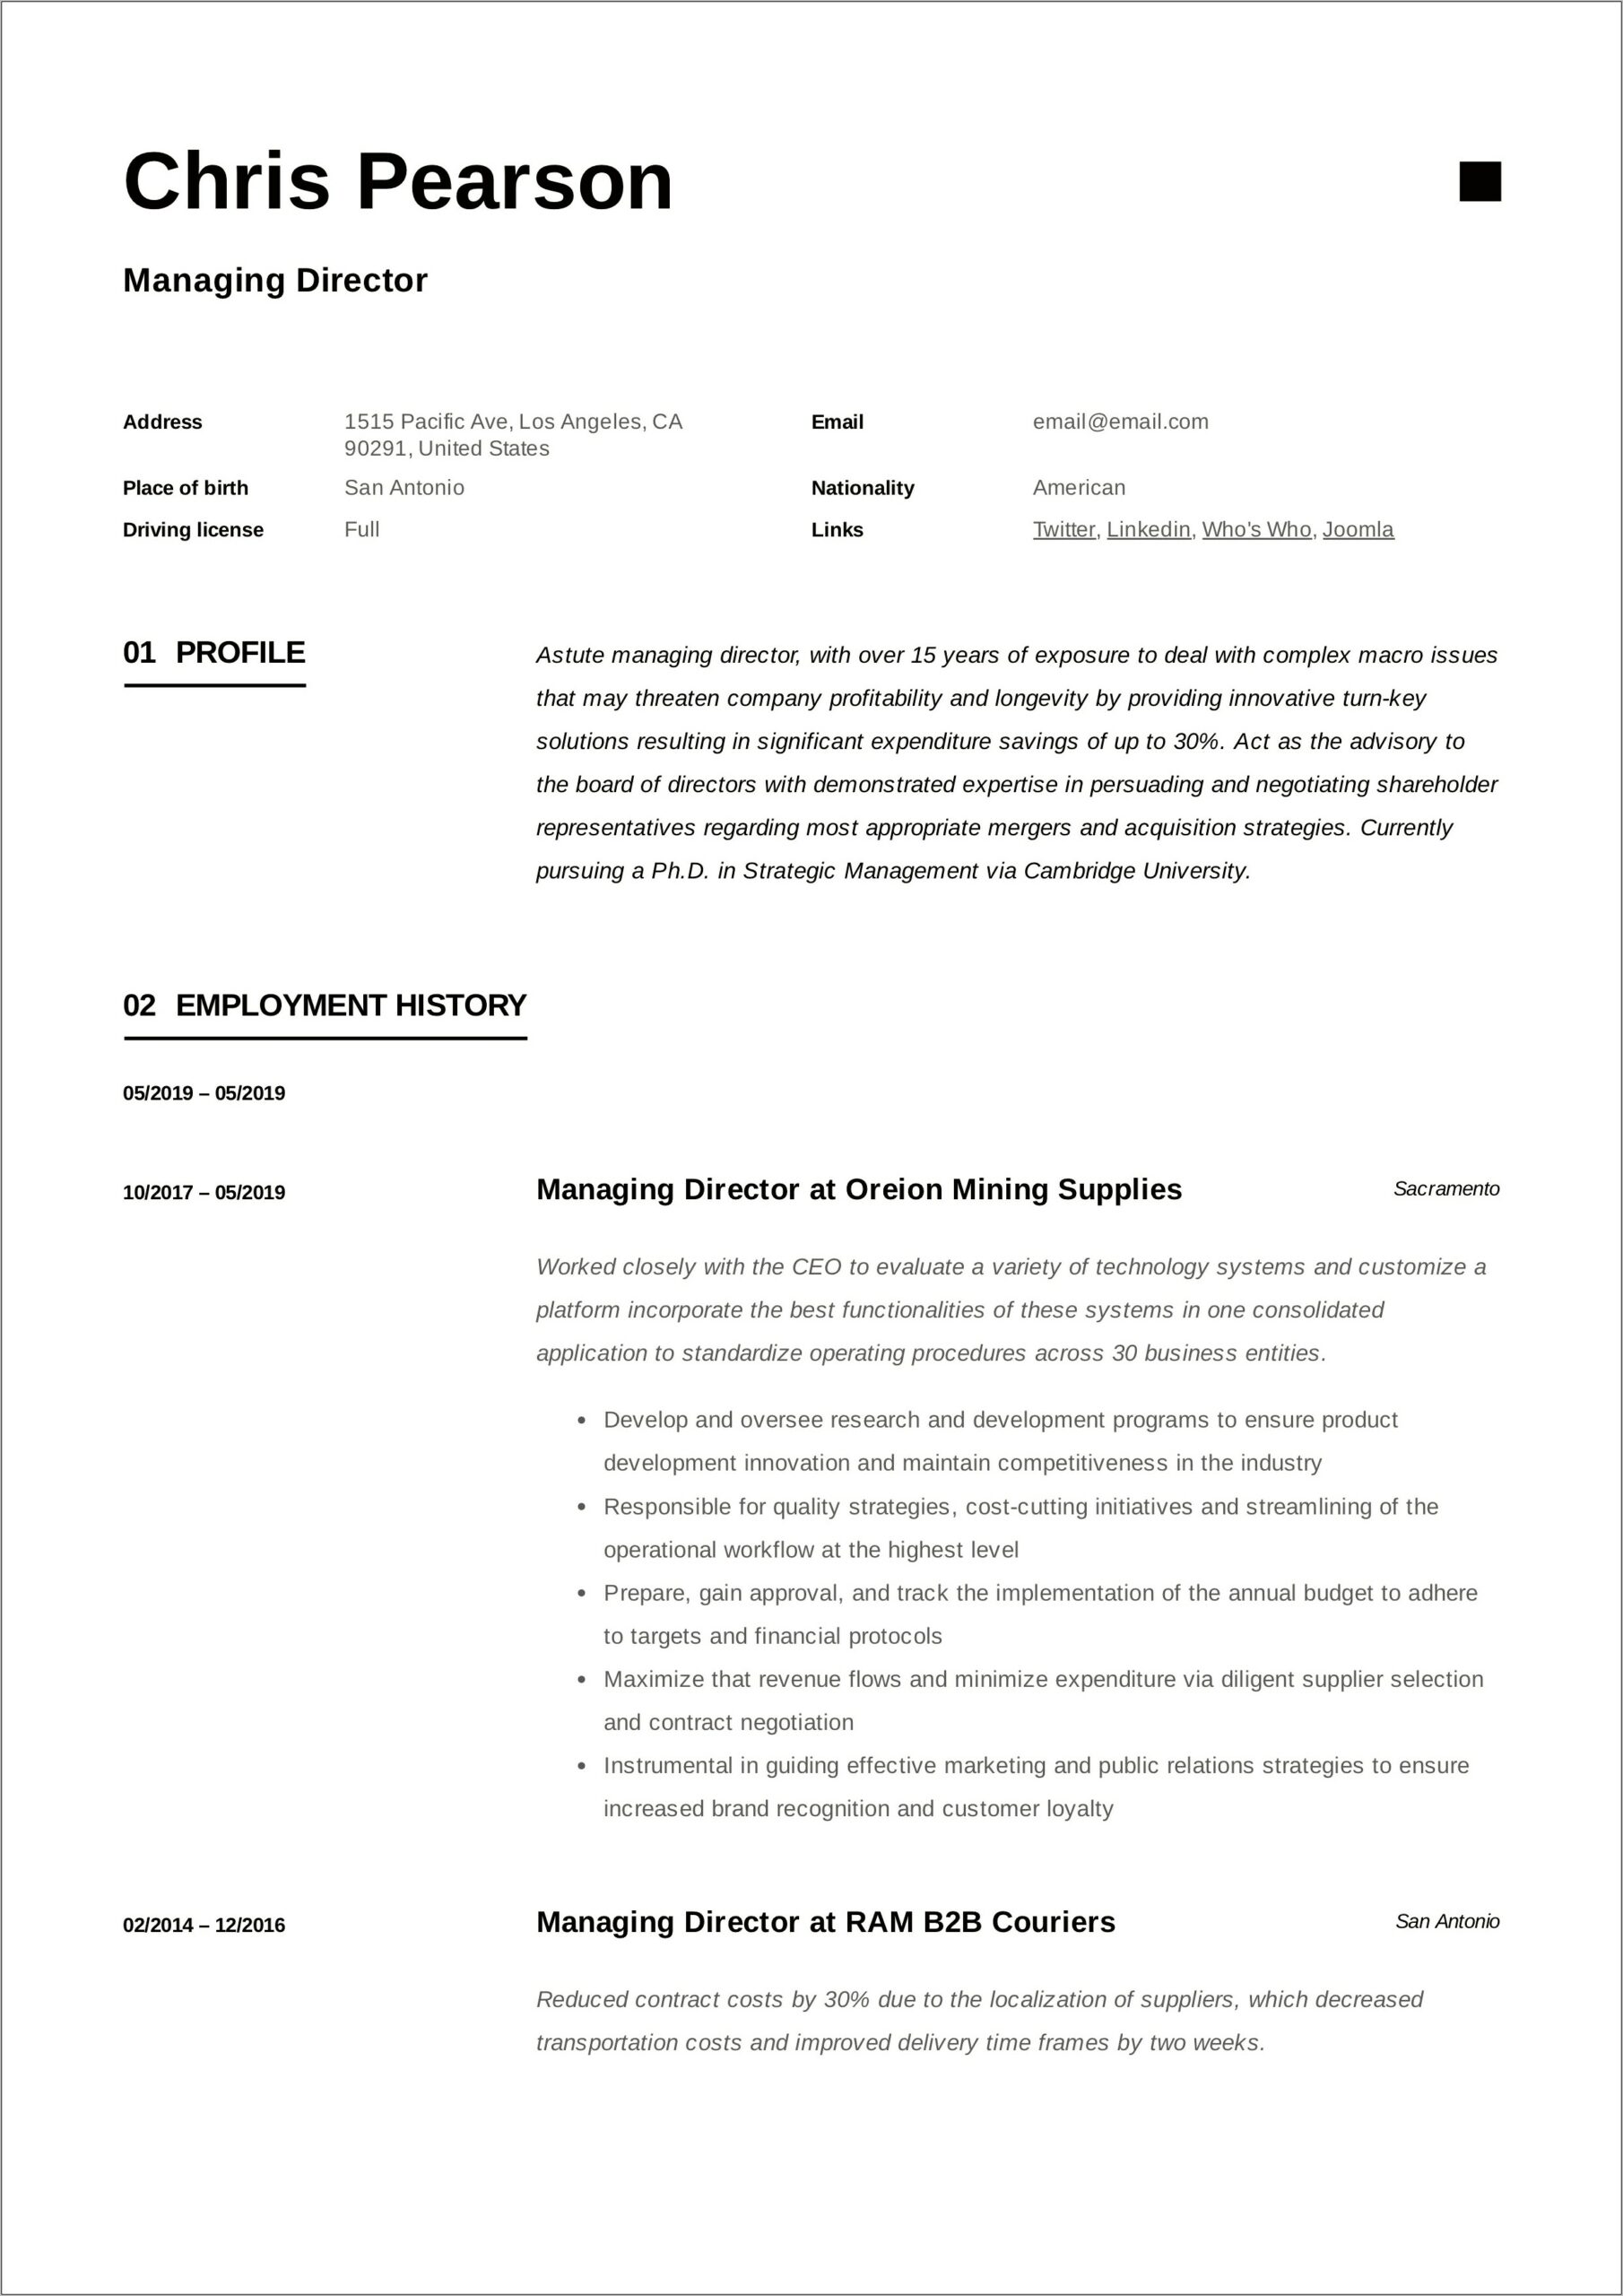 Resume Format For The Post Of Managing Director